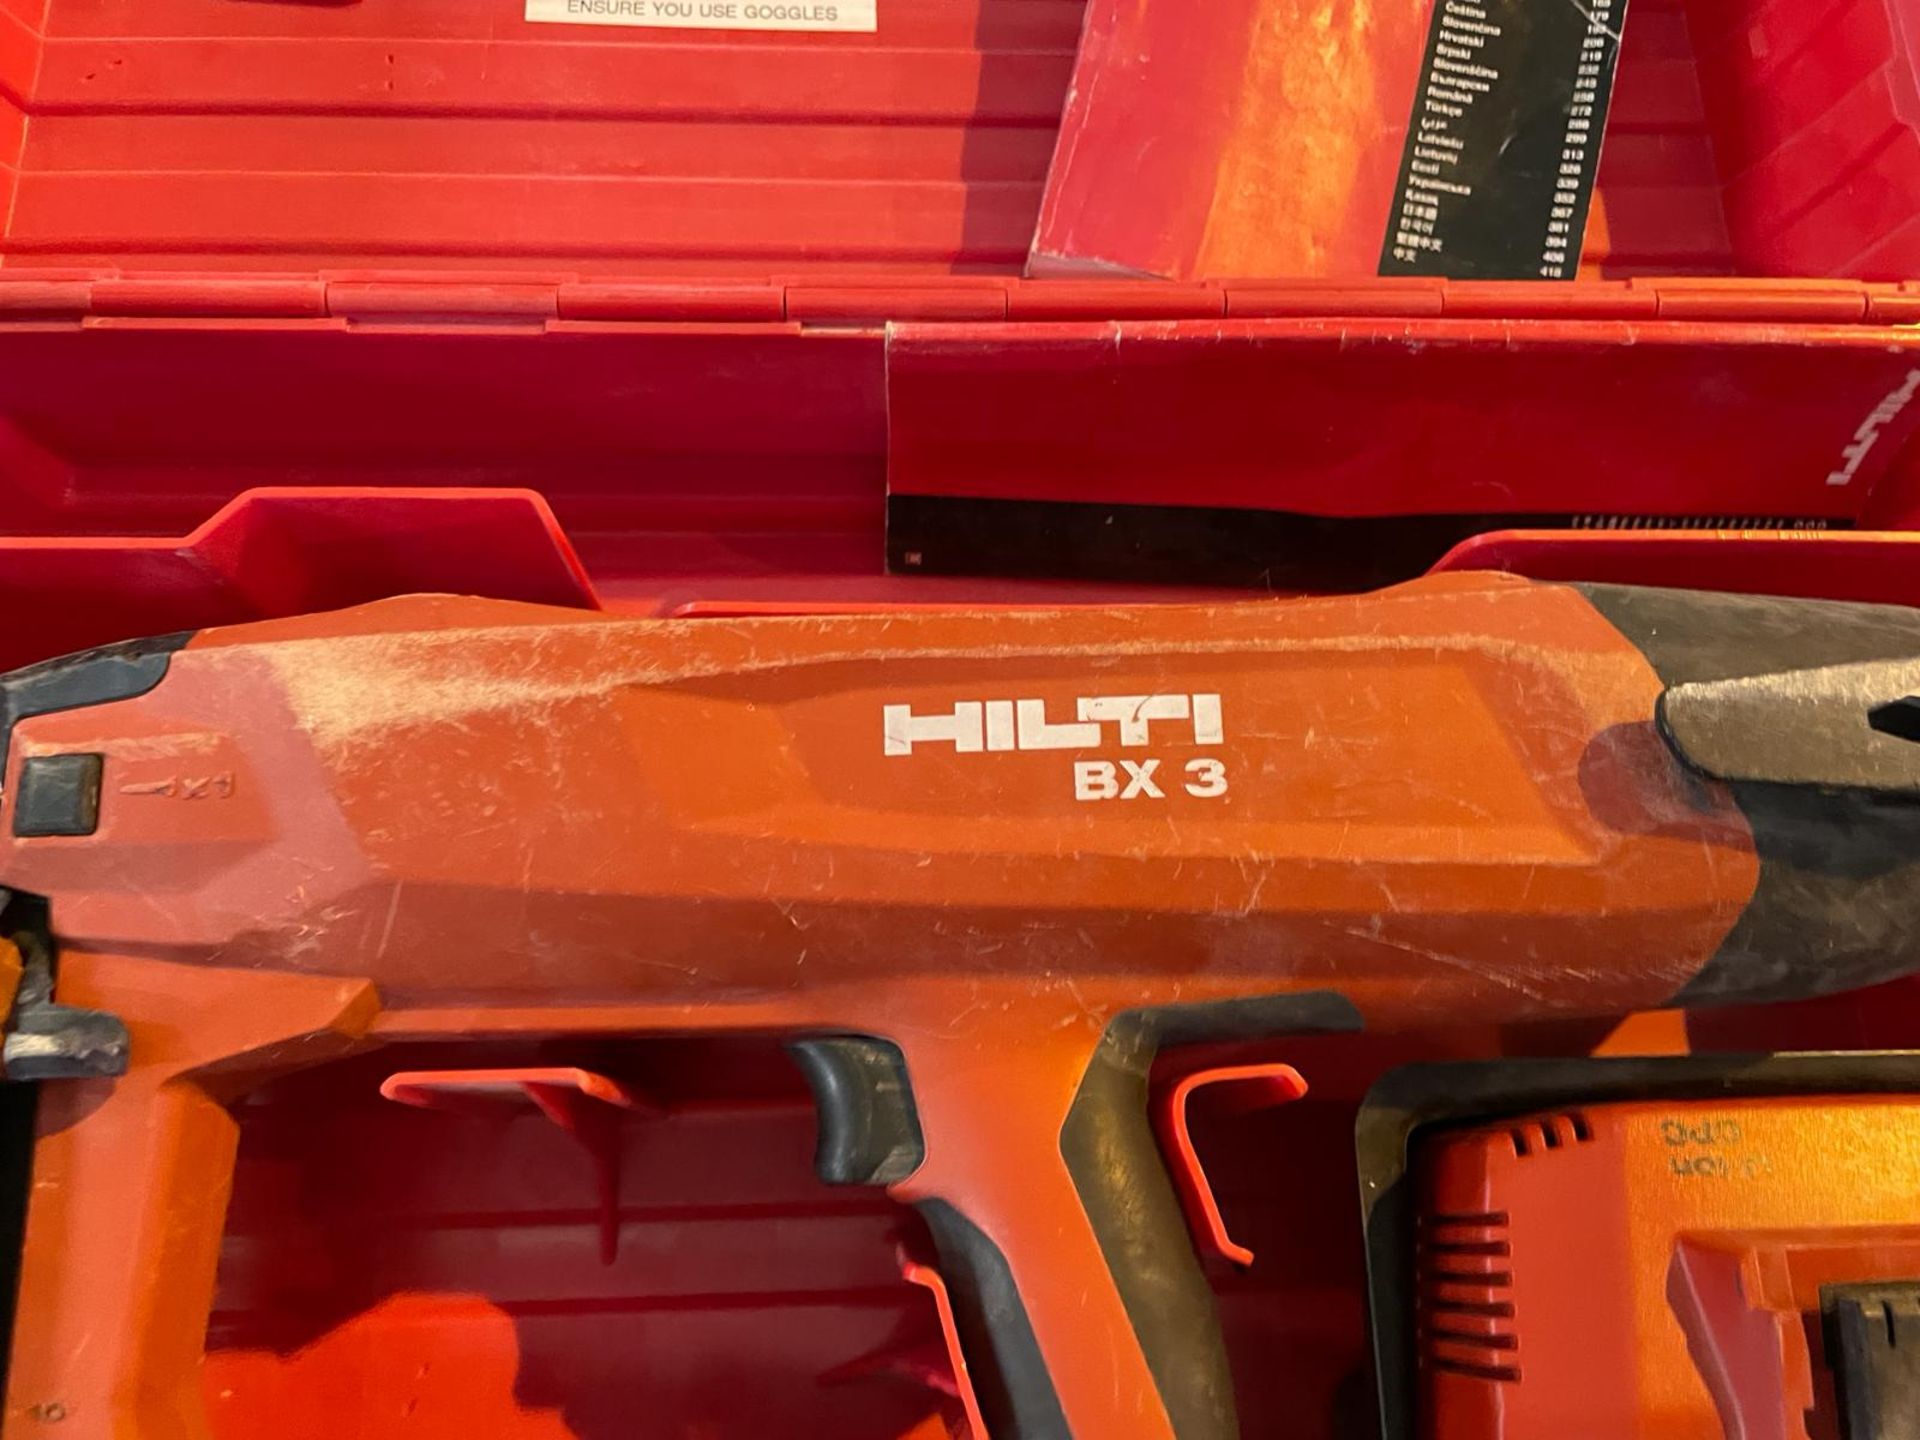 1 x Hilti BX3 Cordless Nail Gun Fastening Tool - Includes Case, Battery and Charger - RRP £3,400 - Image 2 of 7